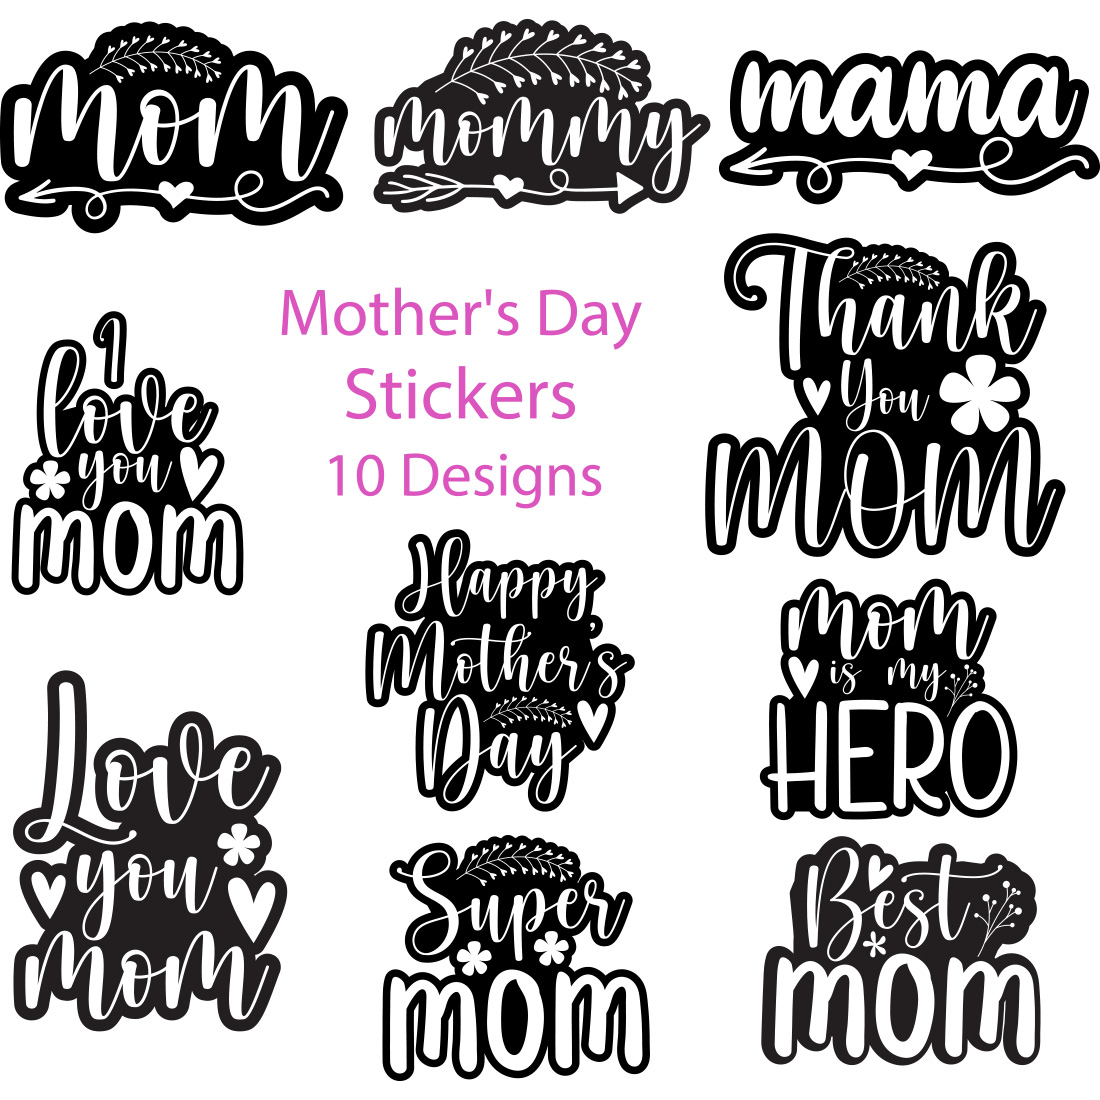 Mother's Day Stickers Bundle main cover image.